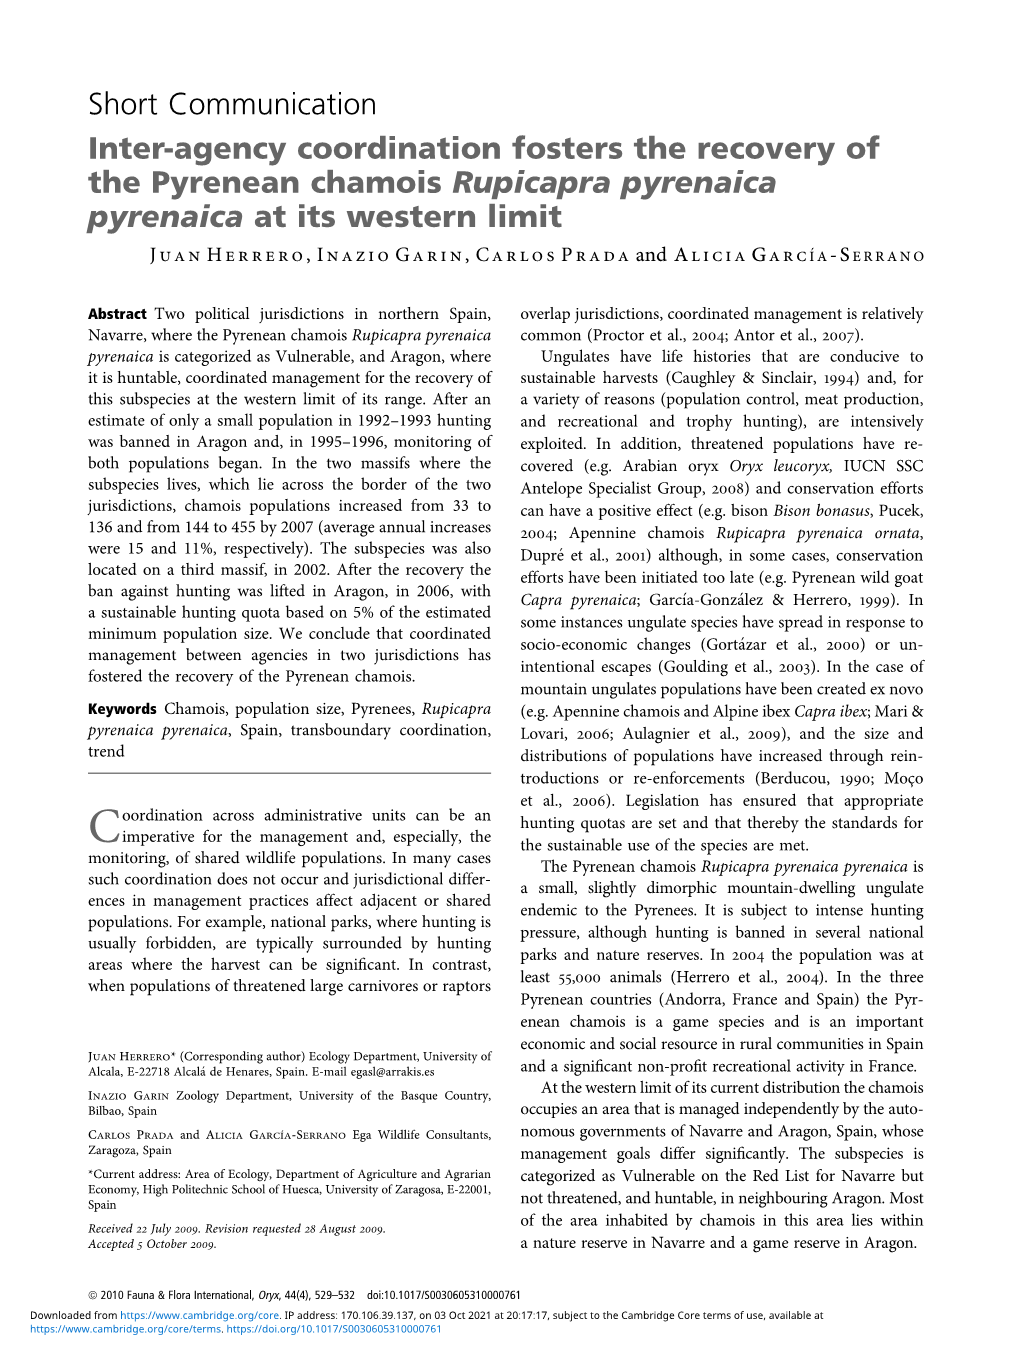 Inter-Agency Coordination Fosters the Recovery of the Pyrenean Chamois Rupicapra Pyrenaica Pyrenaica at Its Western Limit